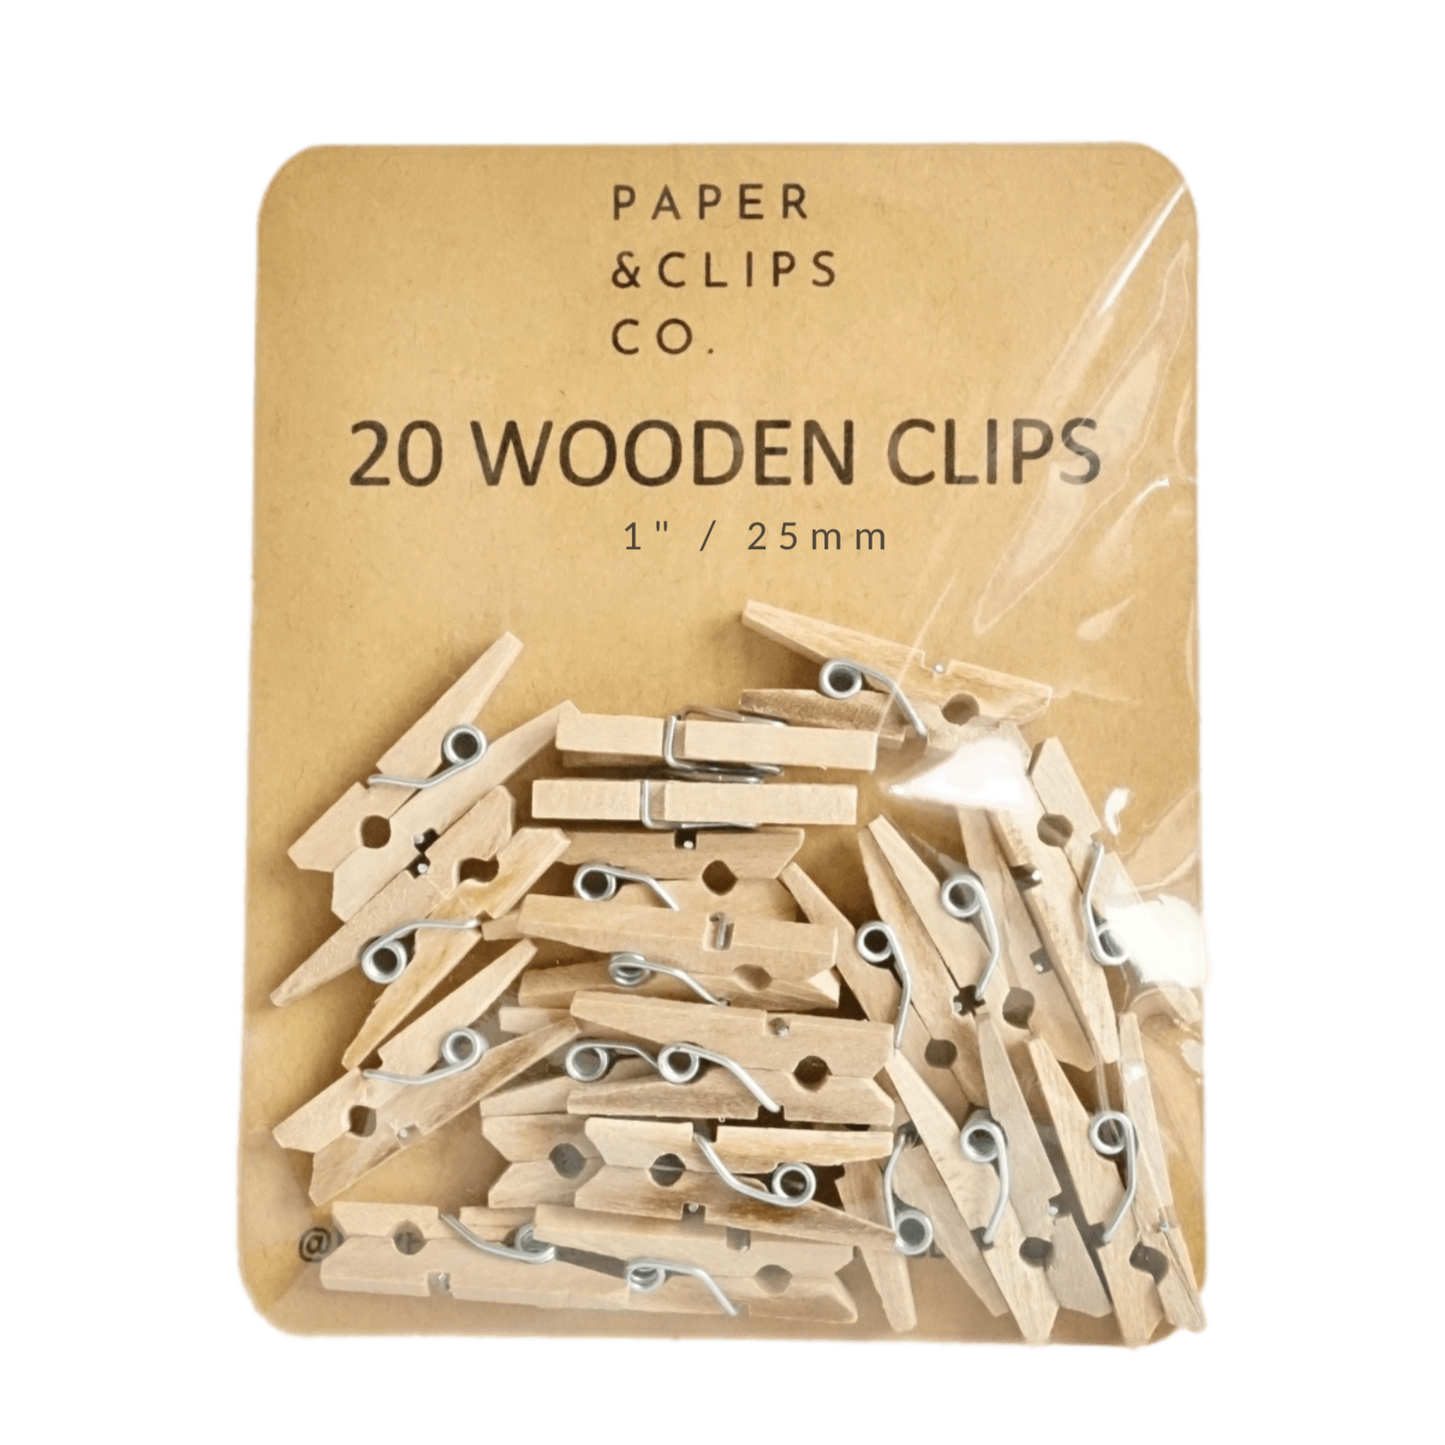 Brown Miniature Clothespins Wooden Clips